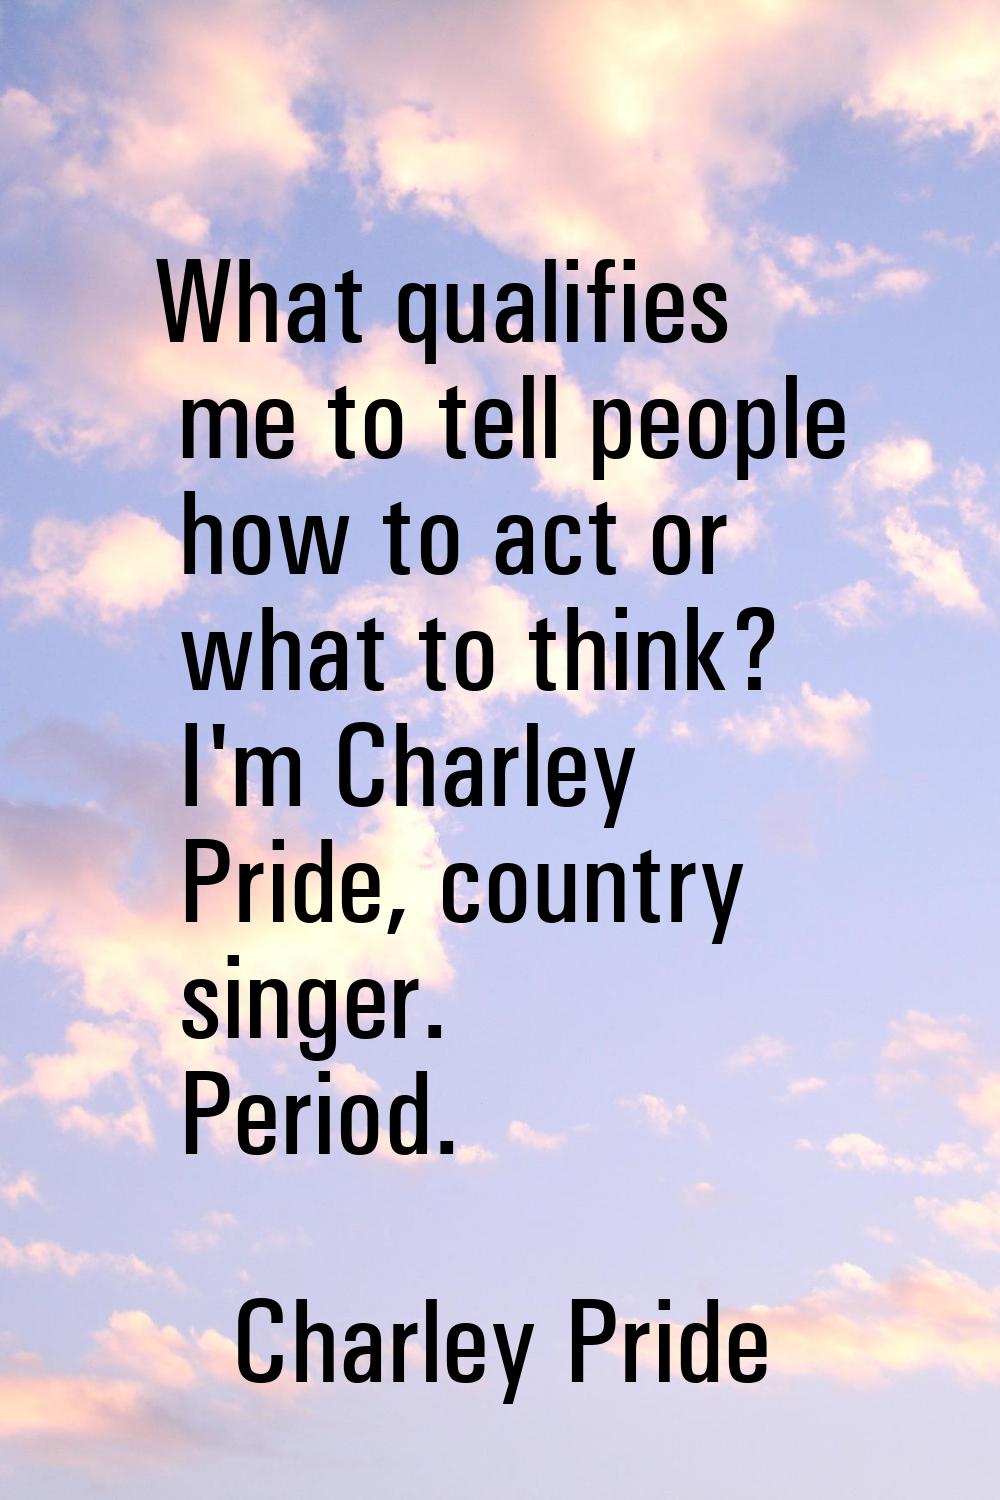 What qualifies me to tell people how to act or what to think? I'm Charley Pride, country singer. Pe